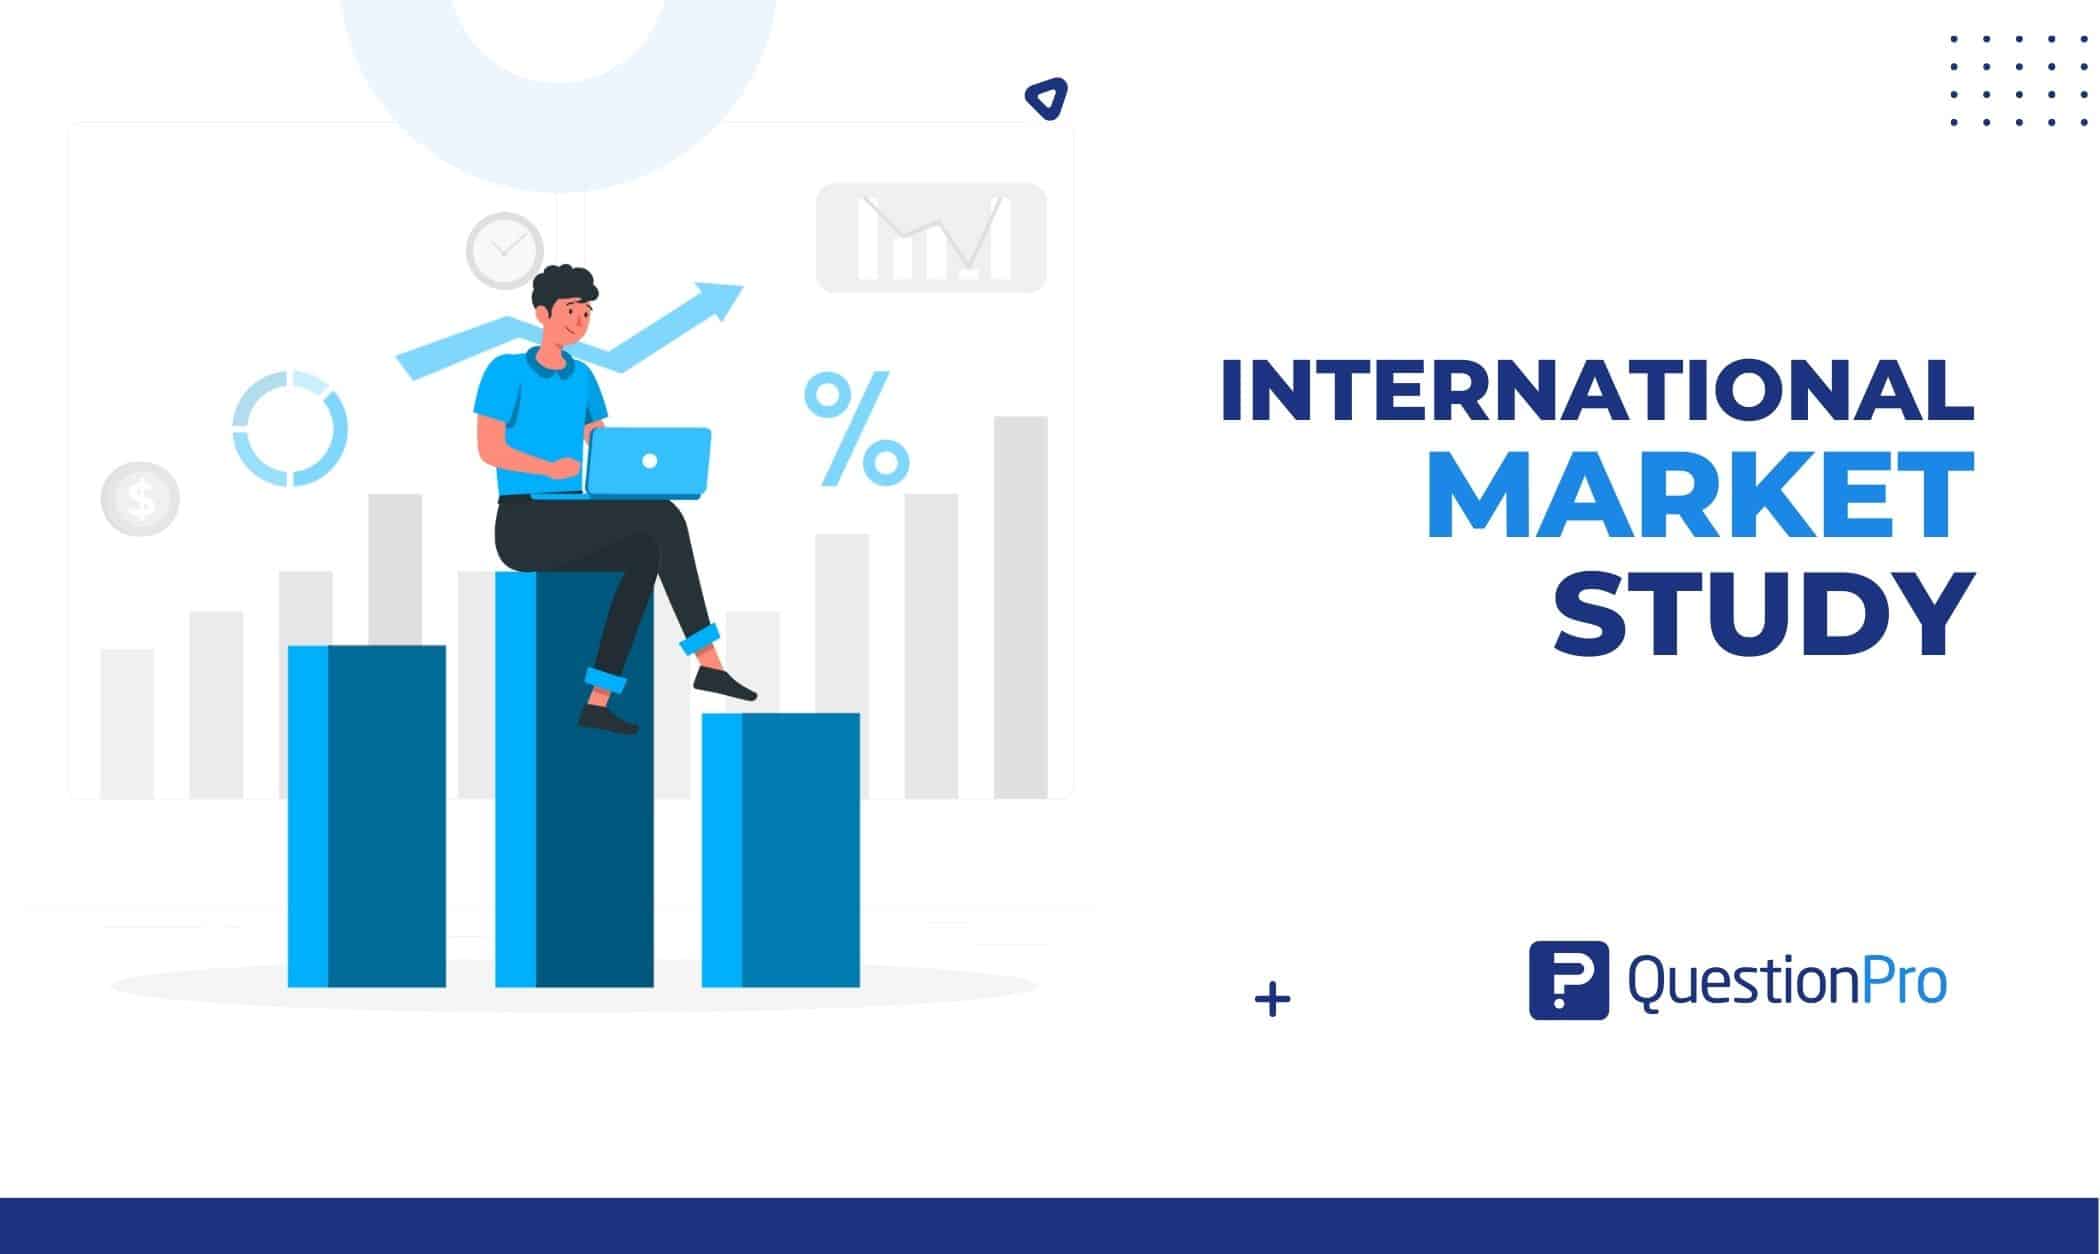 International market study is essential to effective industrial policy. Find out what it is, its steps, and its methods in this blog.